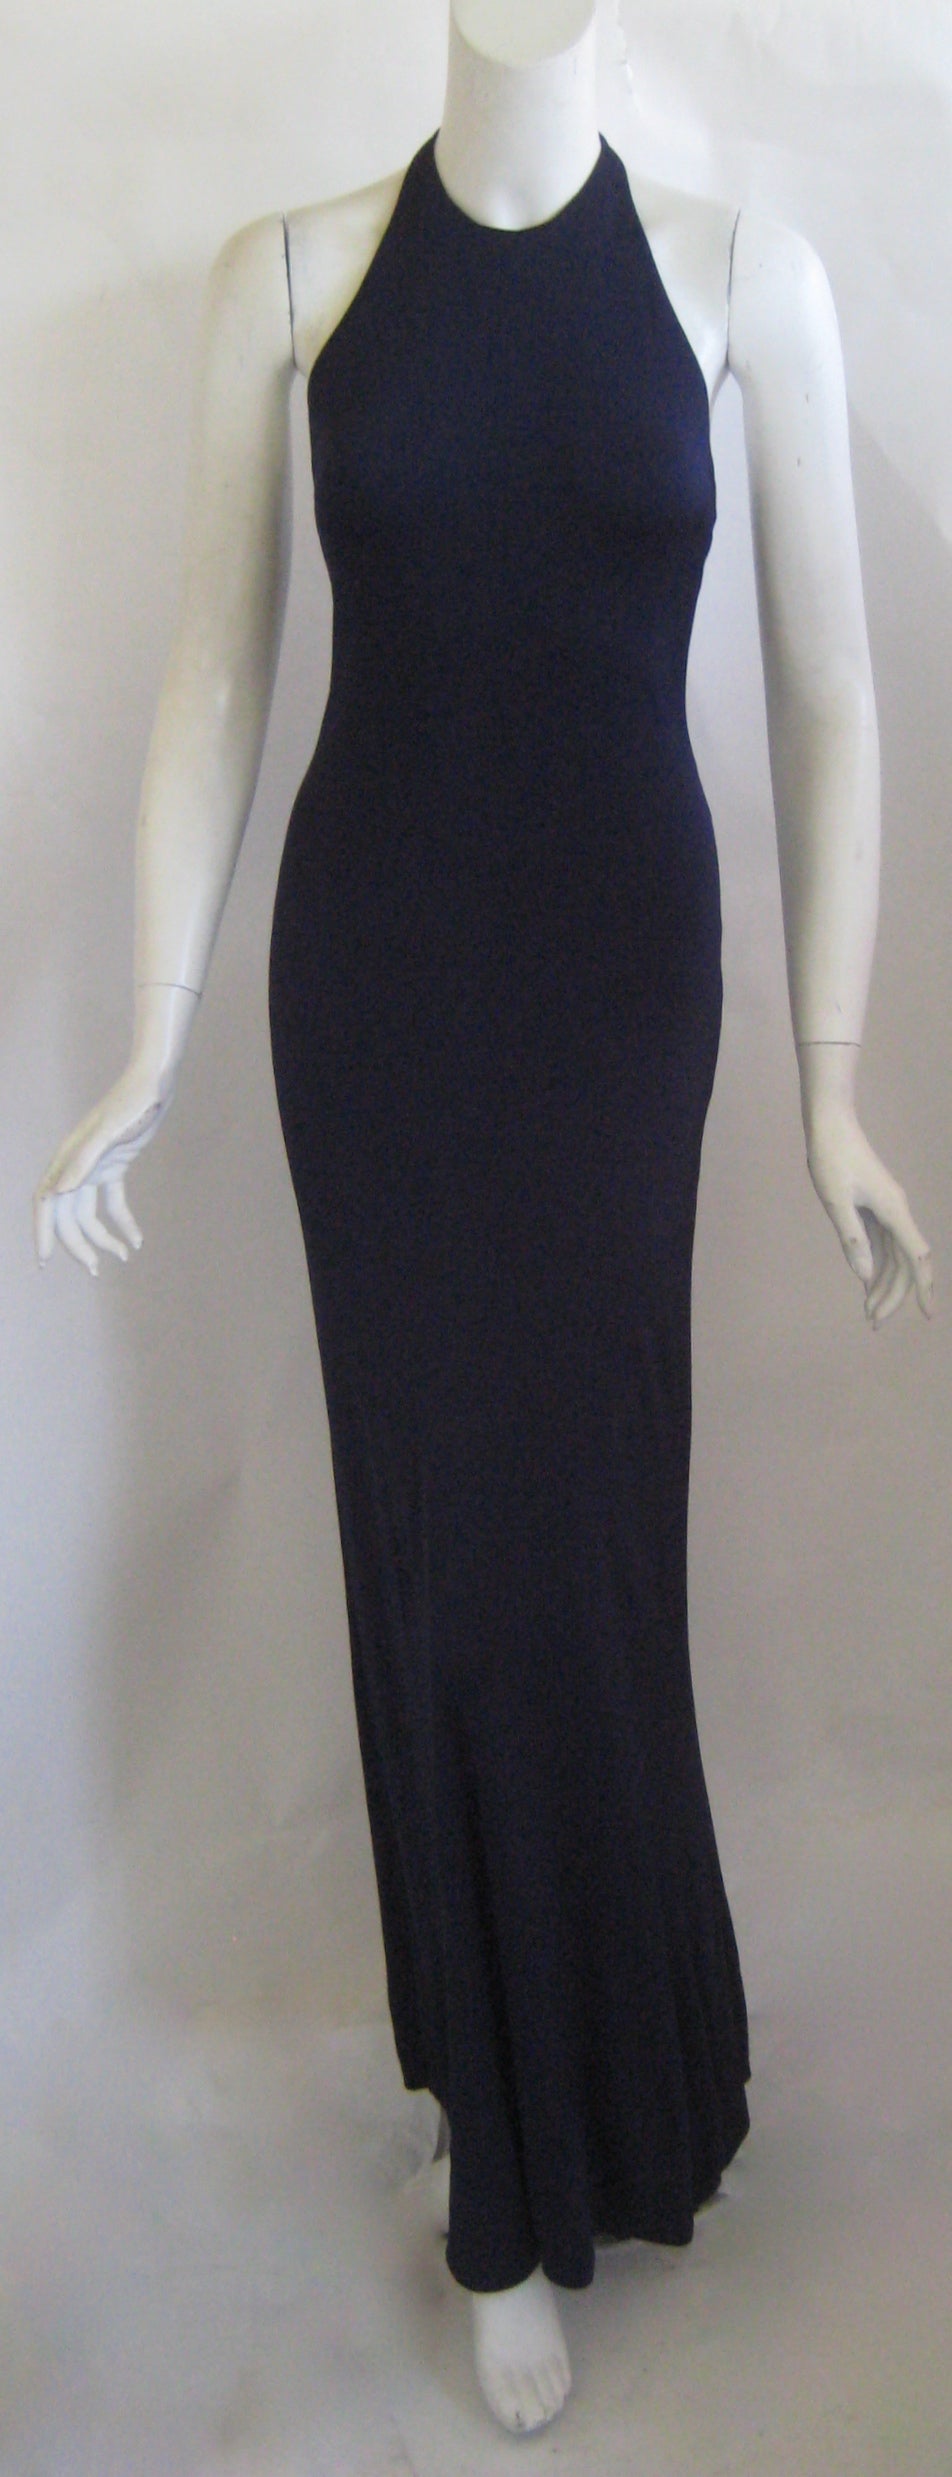 Wonderful deep blue Halston evening gown with matching jacket .This halter gown fastens at the neck with two hooks and thread loops and these are the only closures.The jacket also has no closures and both pieces consist of a double layer of